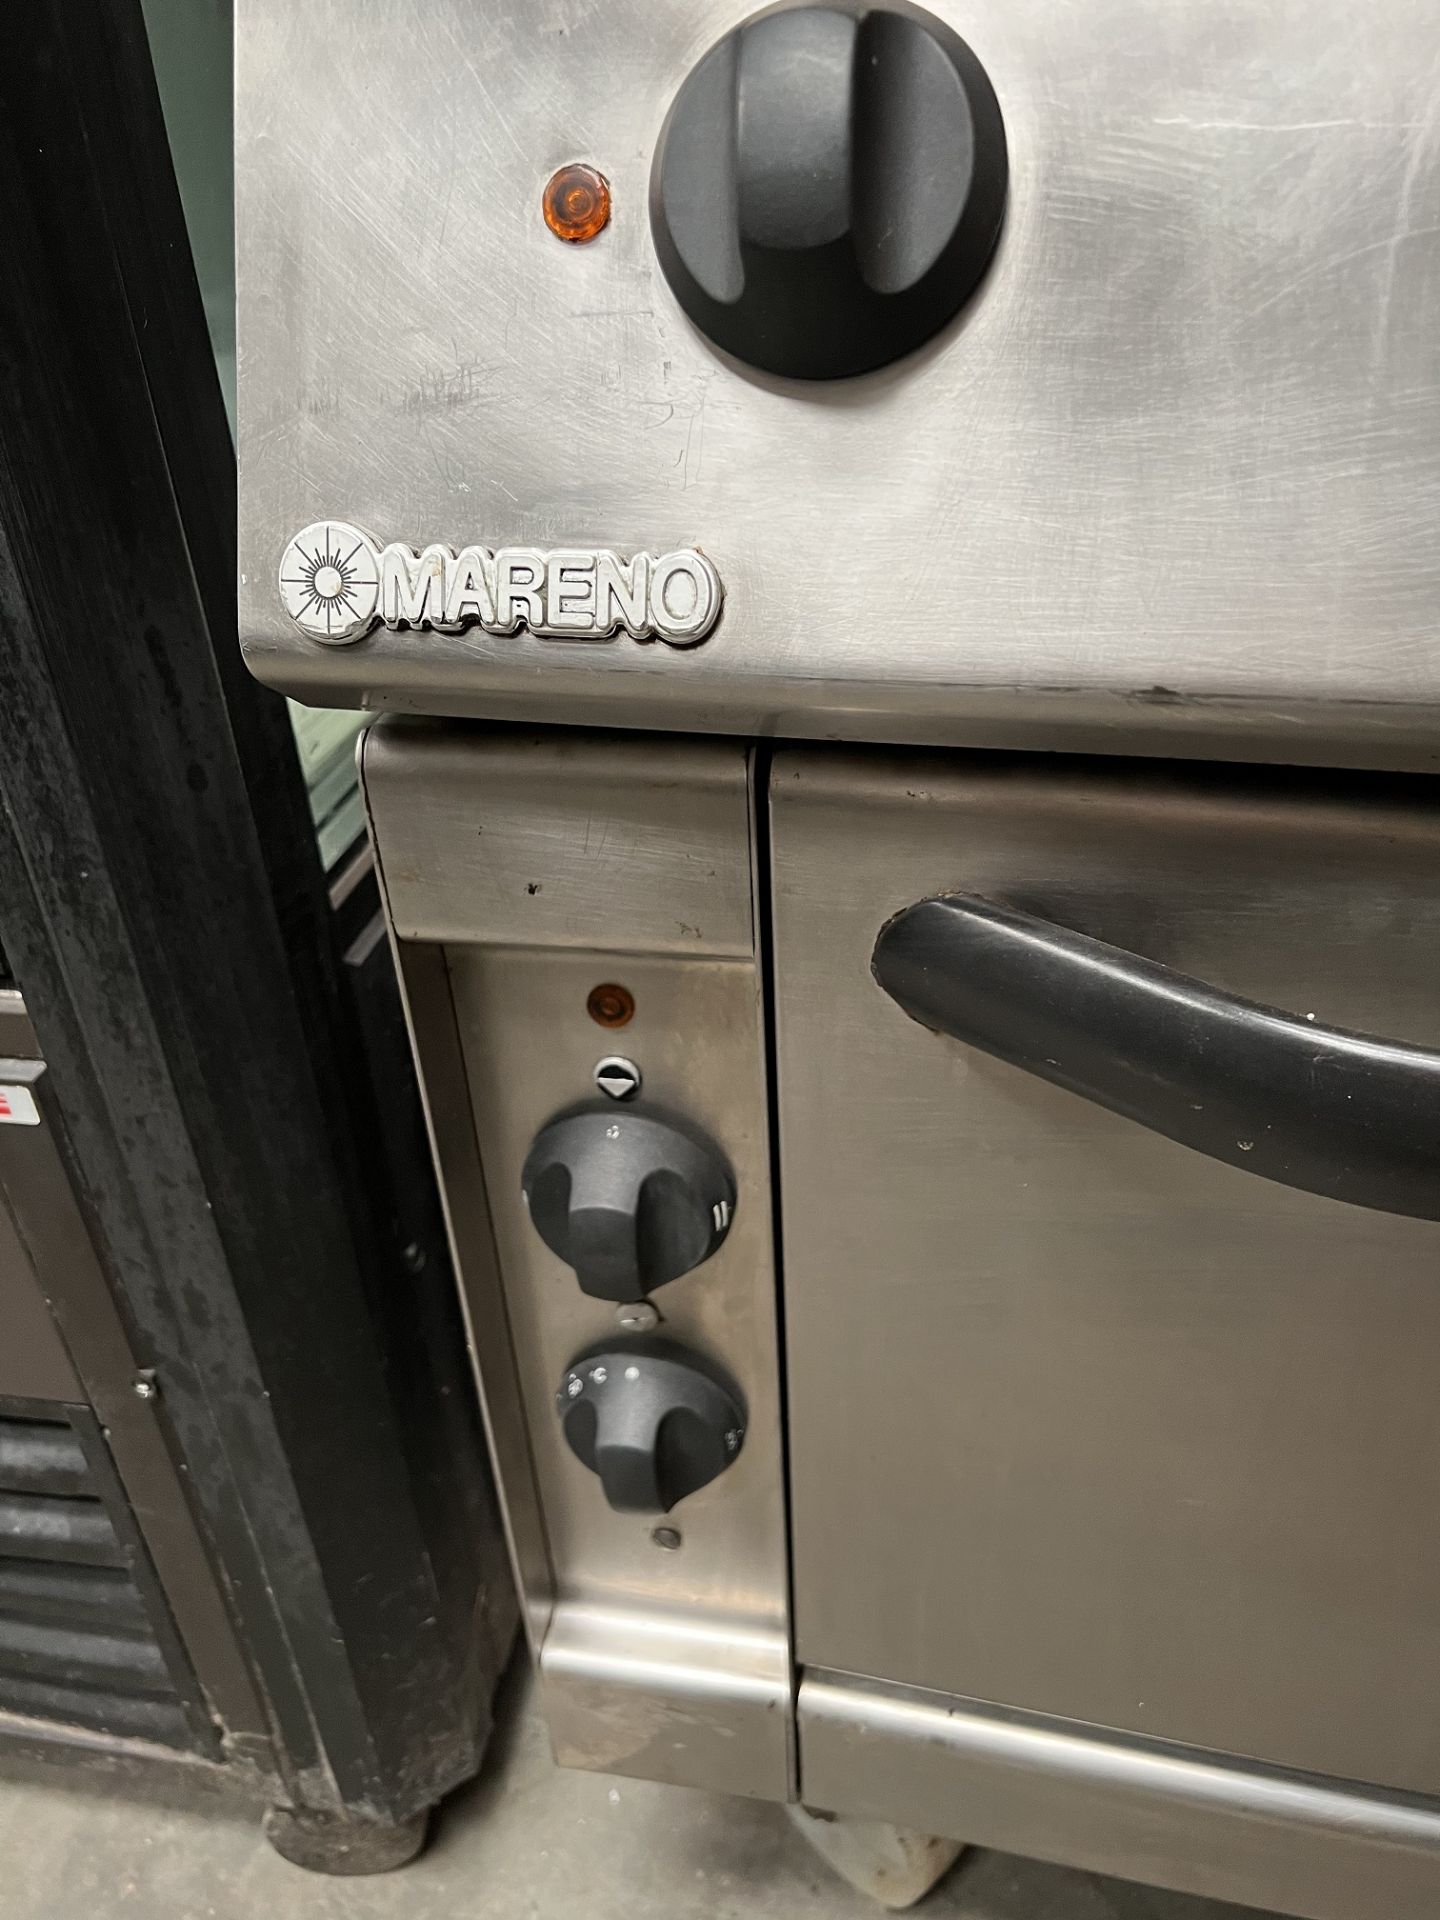 Mareno 4 Ring Electric Oven Range - Image 3 of 3